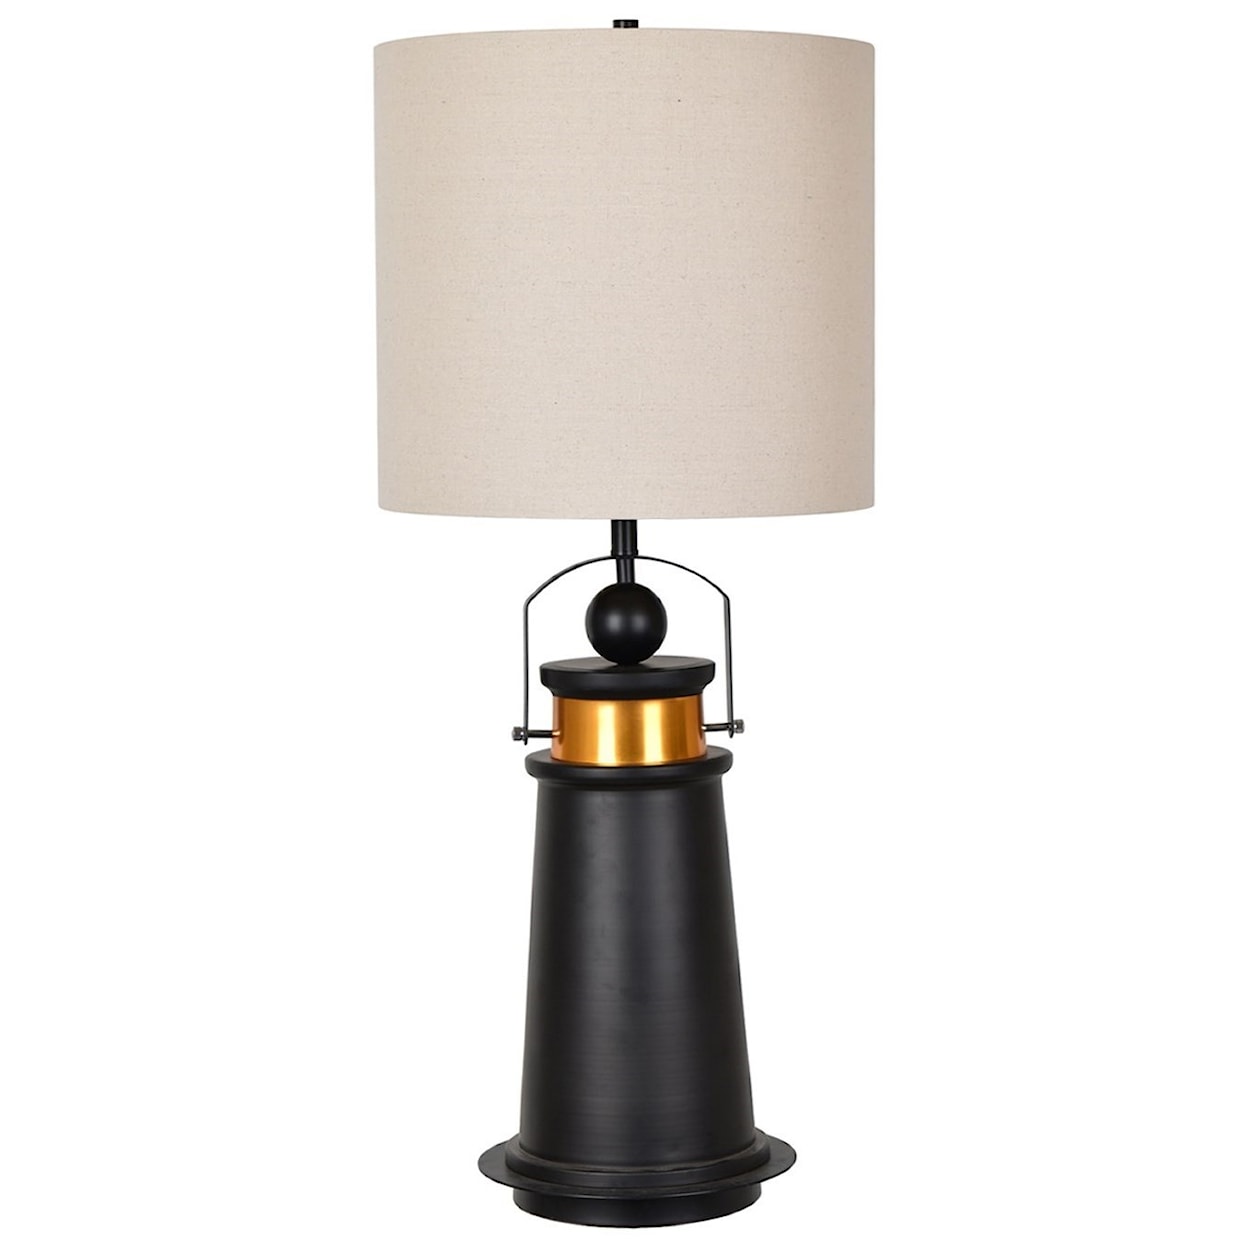 Crestview Collection Lighting Marra Table Lamp